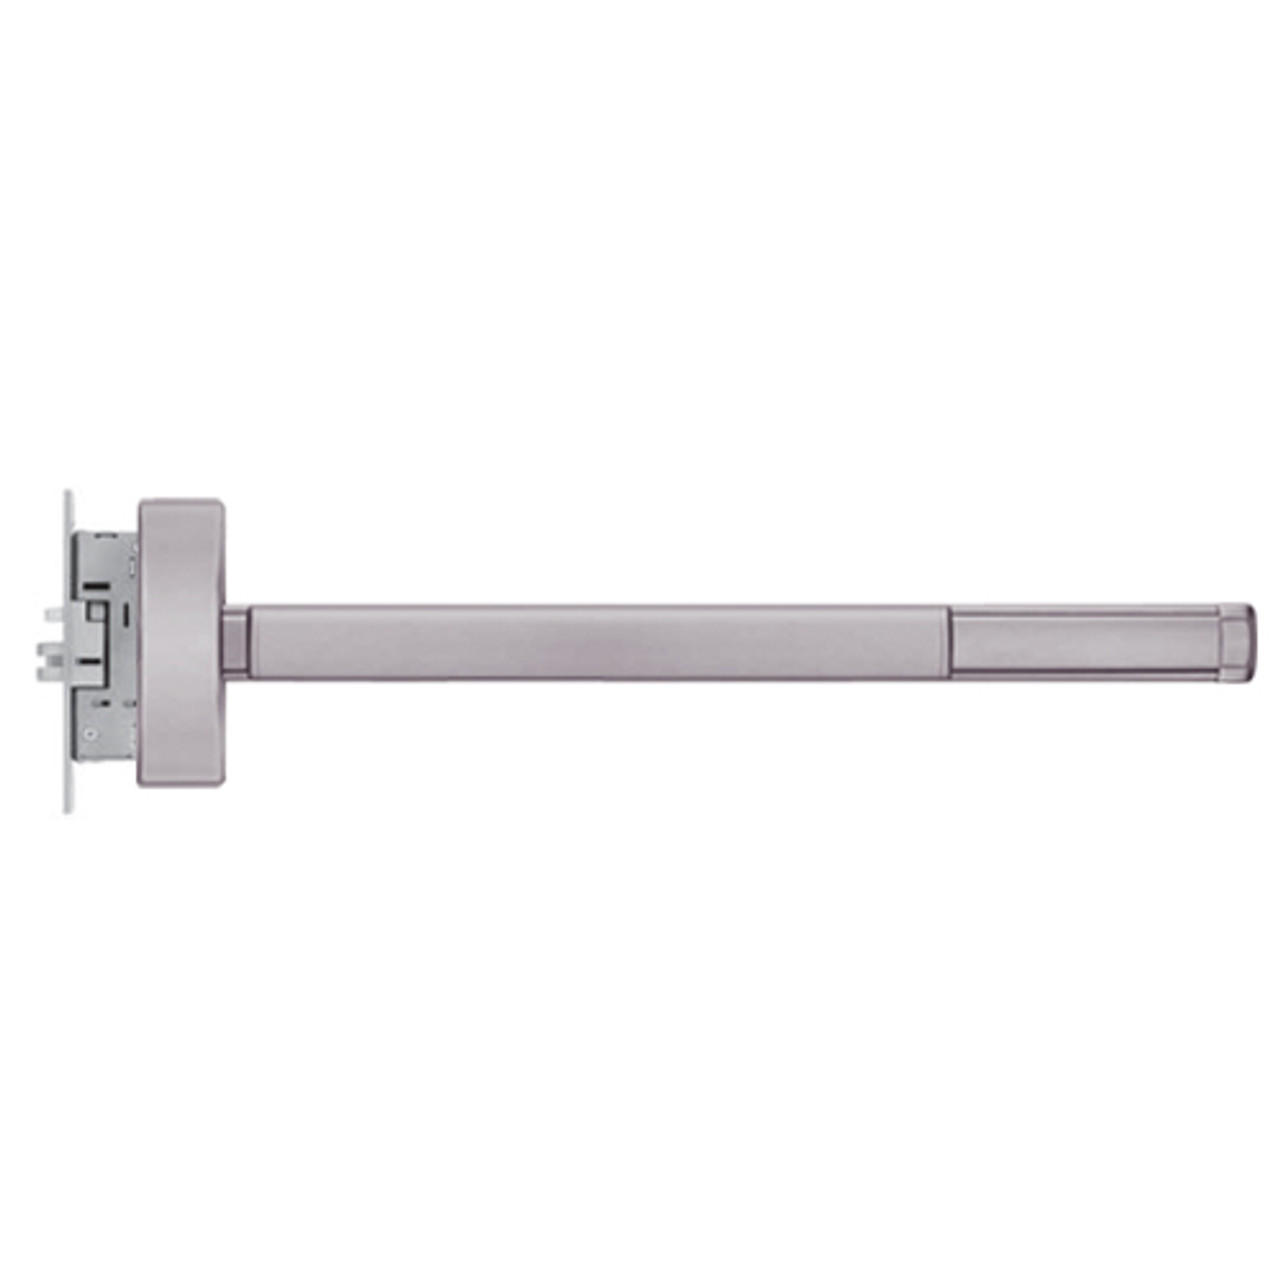 2301CD-RHR-630-48 PHI 2300 Series Non Fire Rated Apex Mortise Exit Device Prepped for Cover Plate with Cylinder Dogging in Satin Stainless Steel Finish